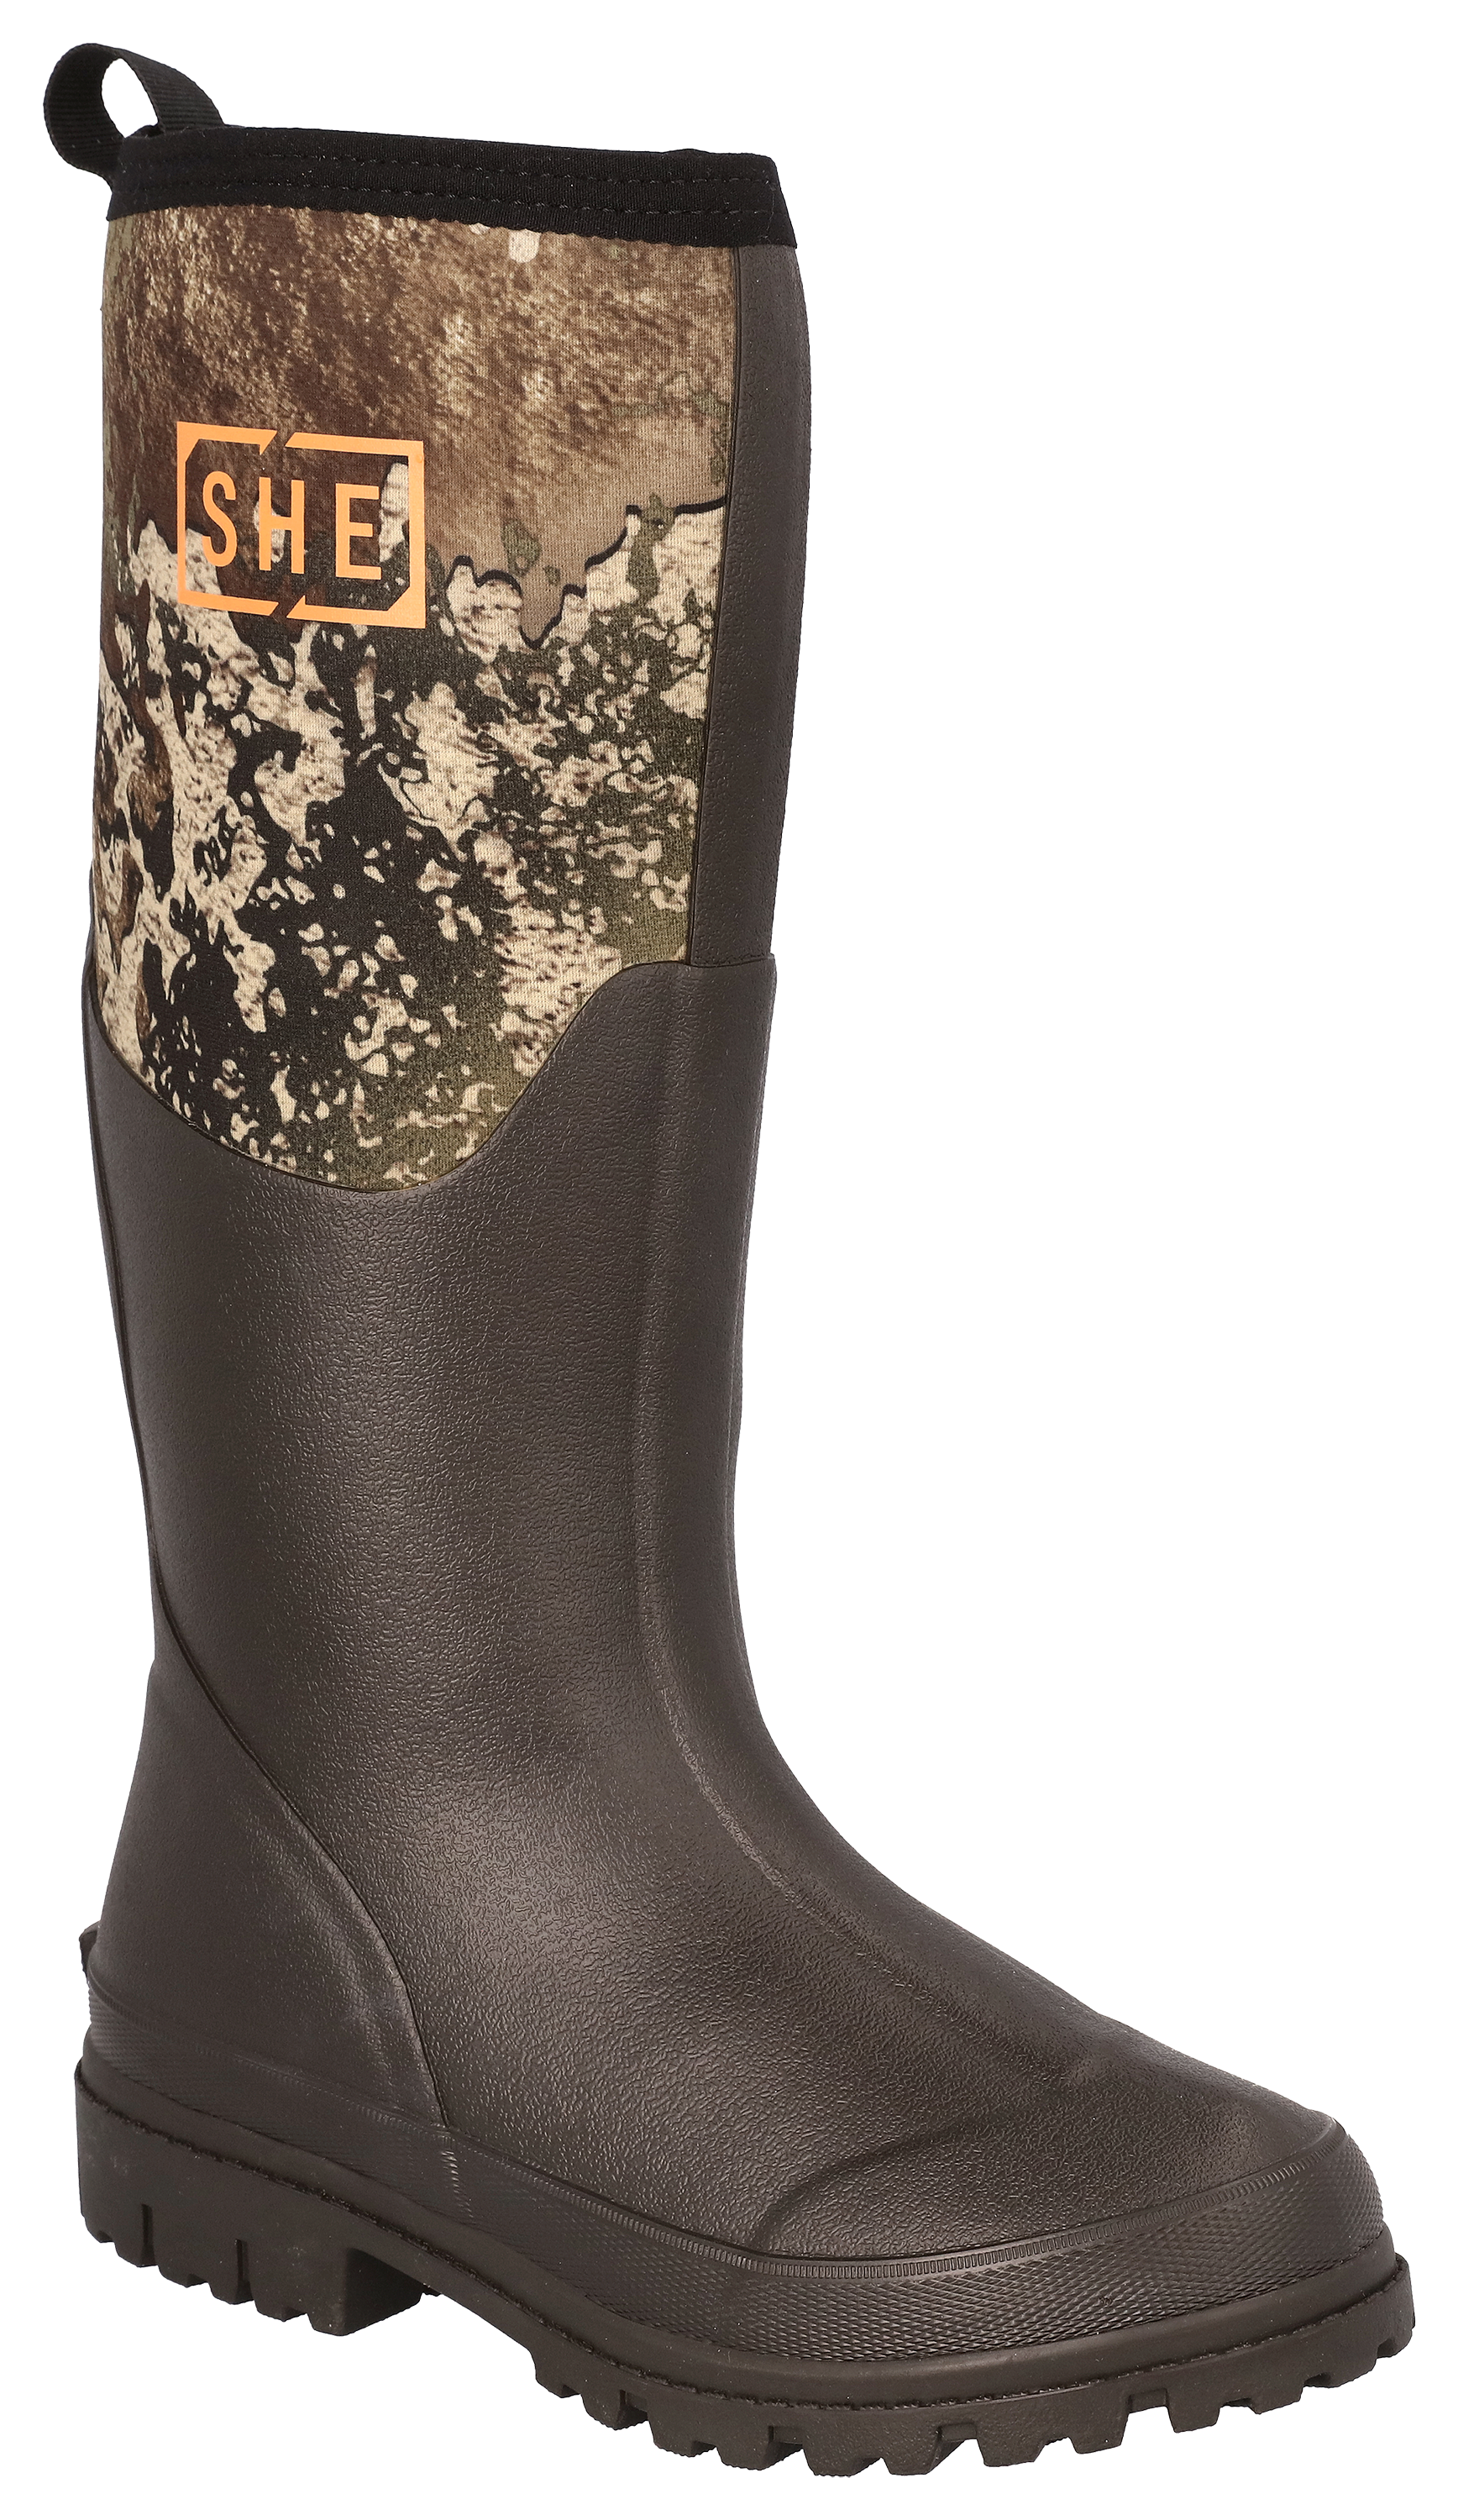 SHE Outdoor Camo Utility Waterproof Rubber Boots for Ladies